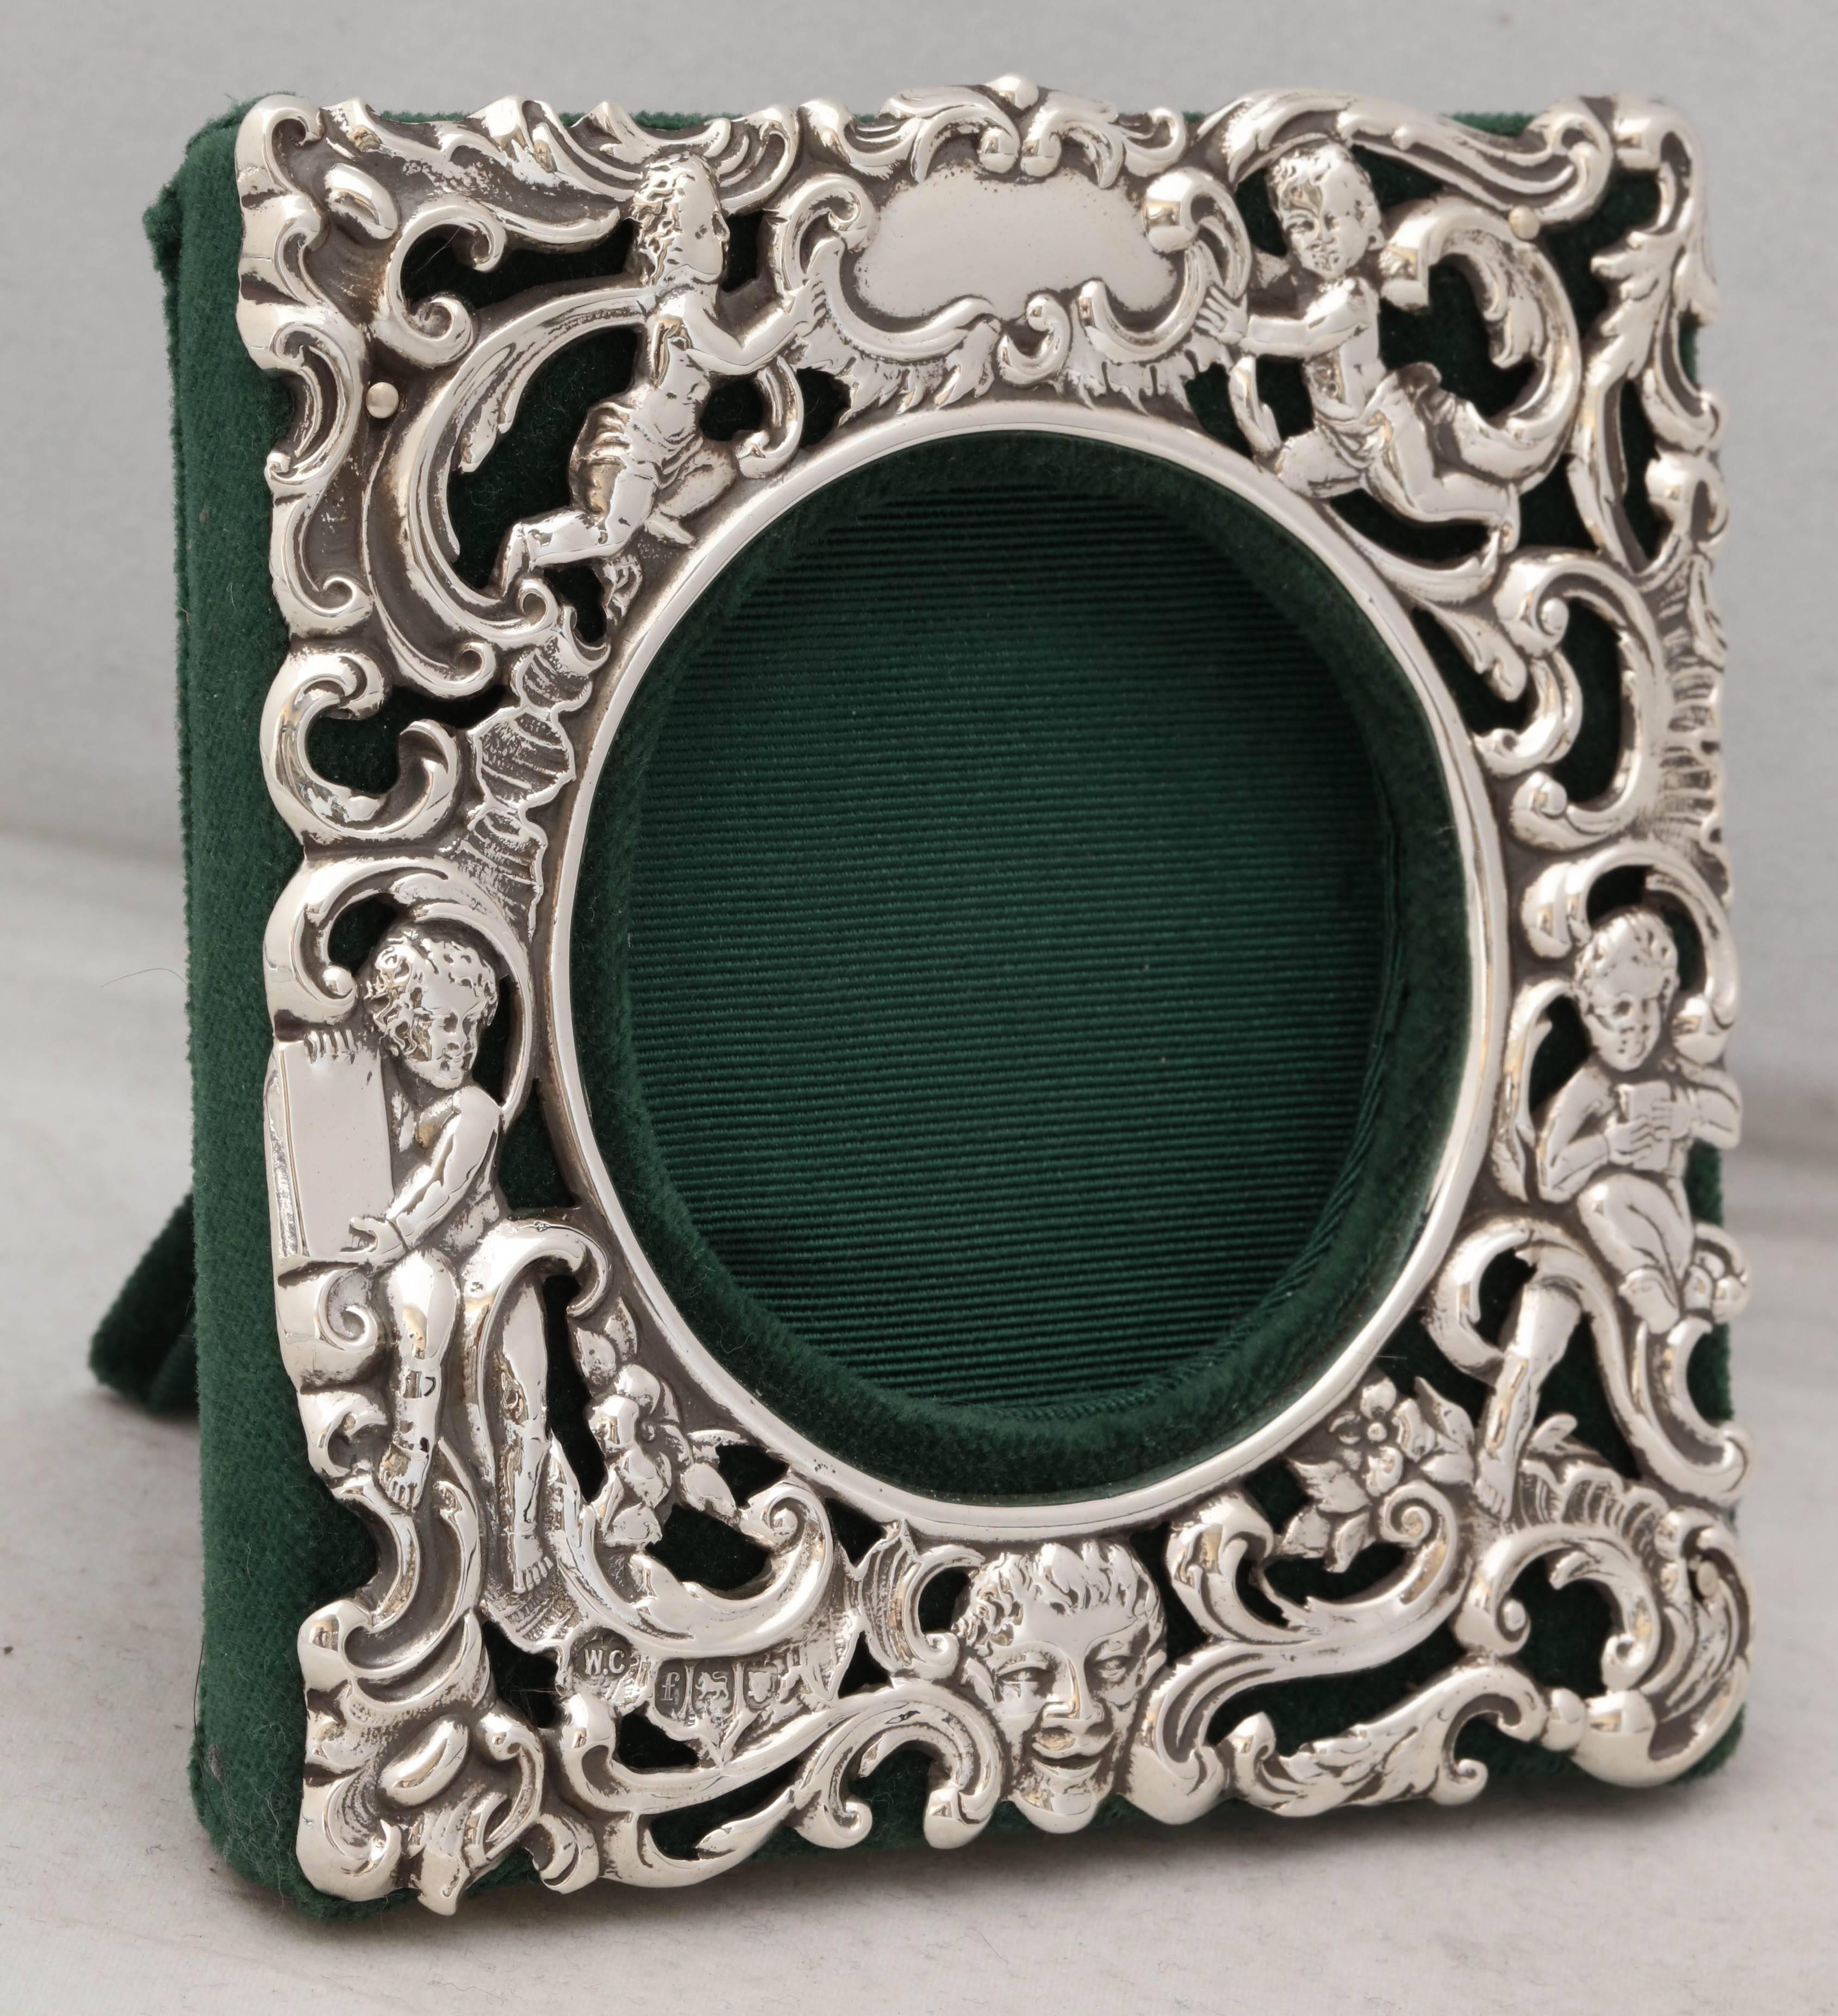 Victorian, sterling silver picture frame, London, 1901, William Comyns maker. Decorated with cherubs and swirls and having a face at the bottom. Vacant cartouche. Backed in dark green velvet. 4